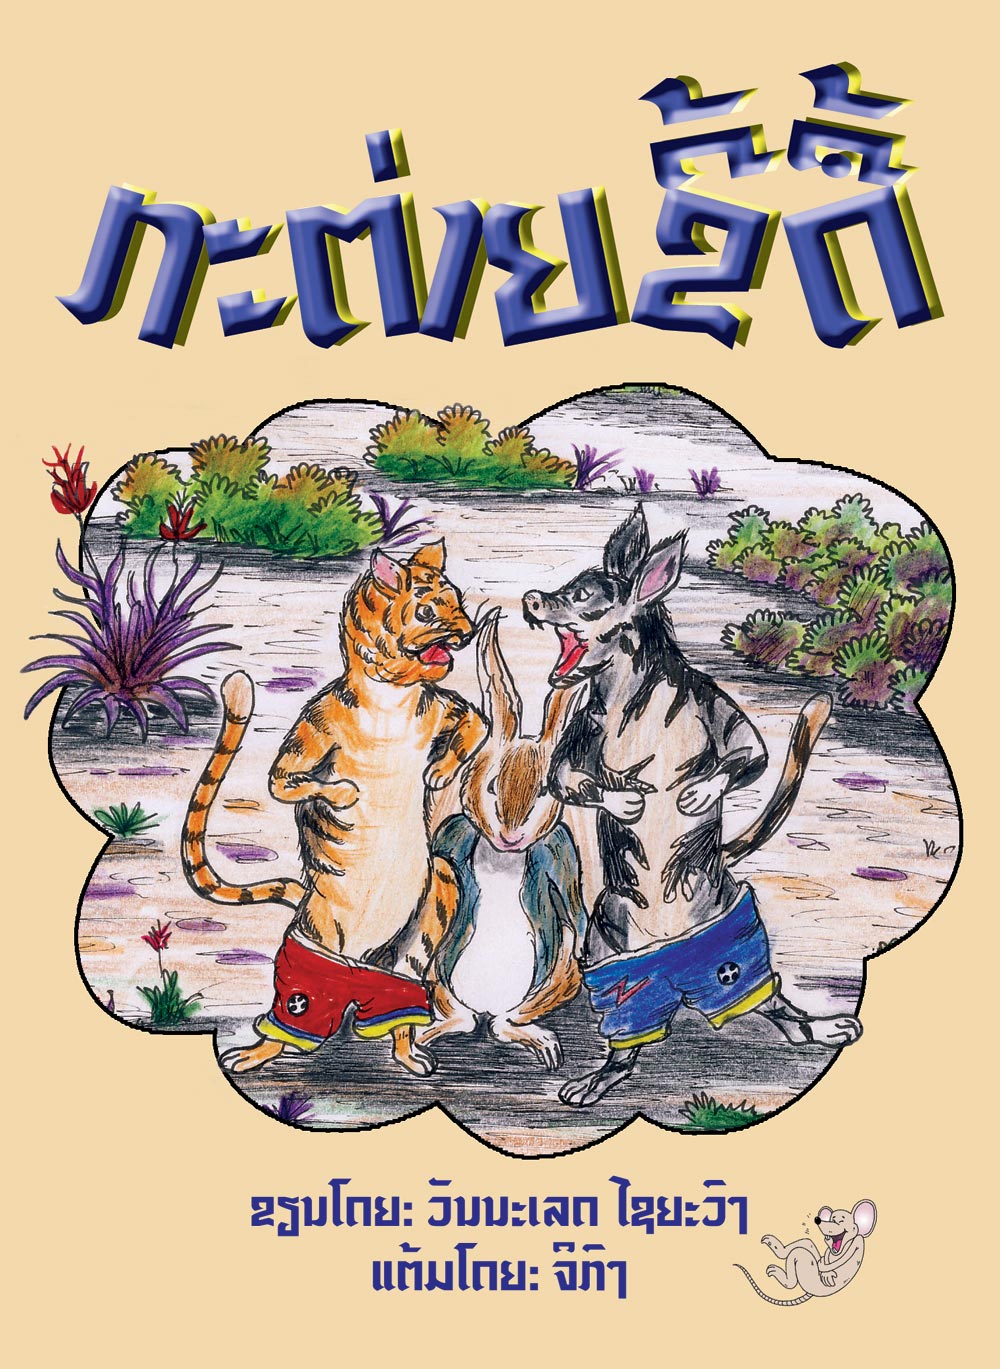 The Naughty Rabbit large book cover, published in Lao language